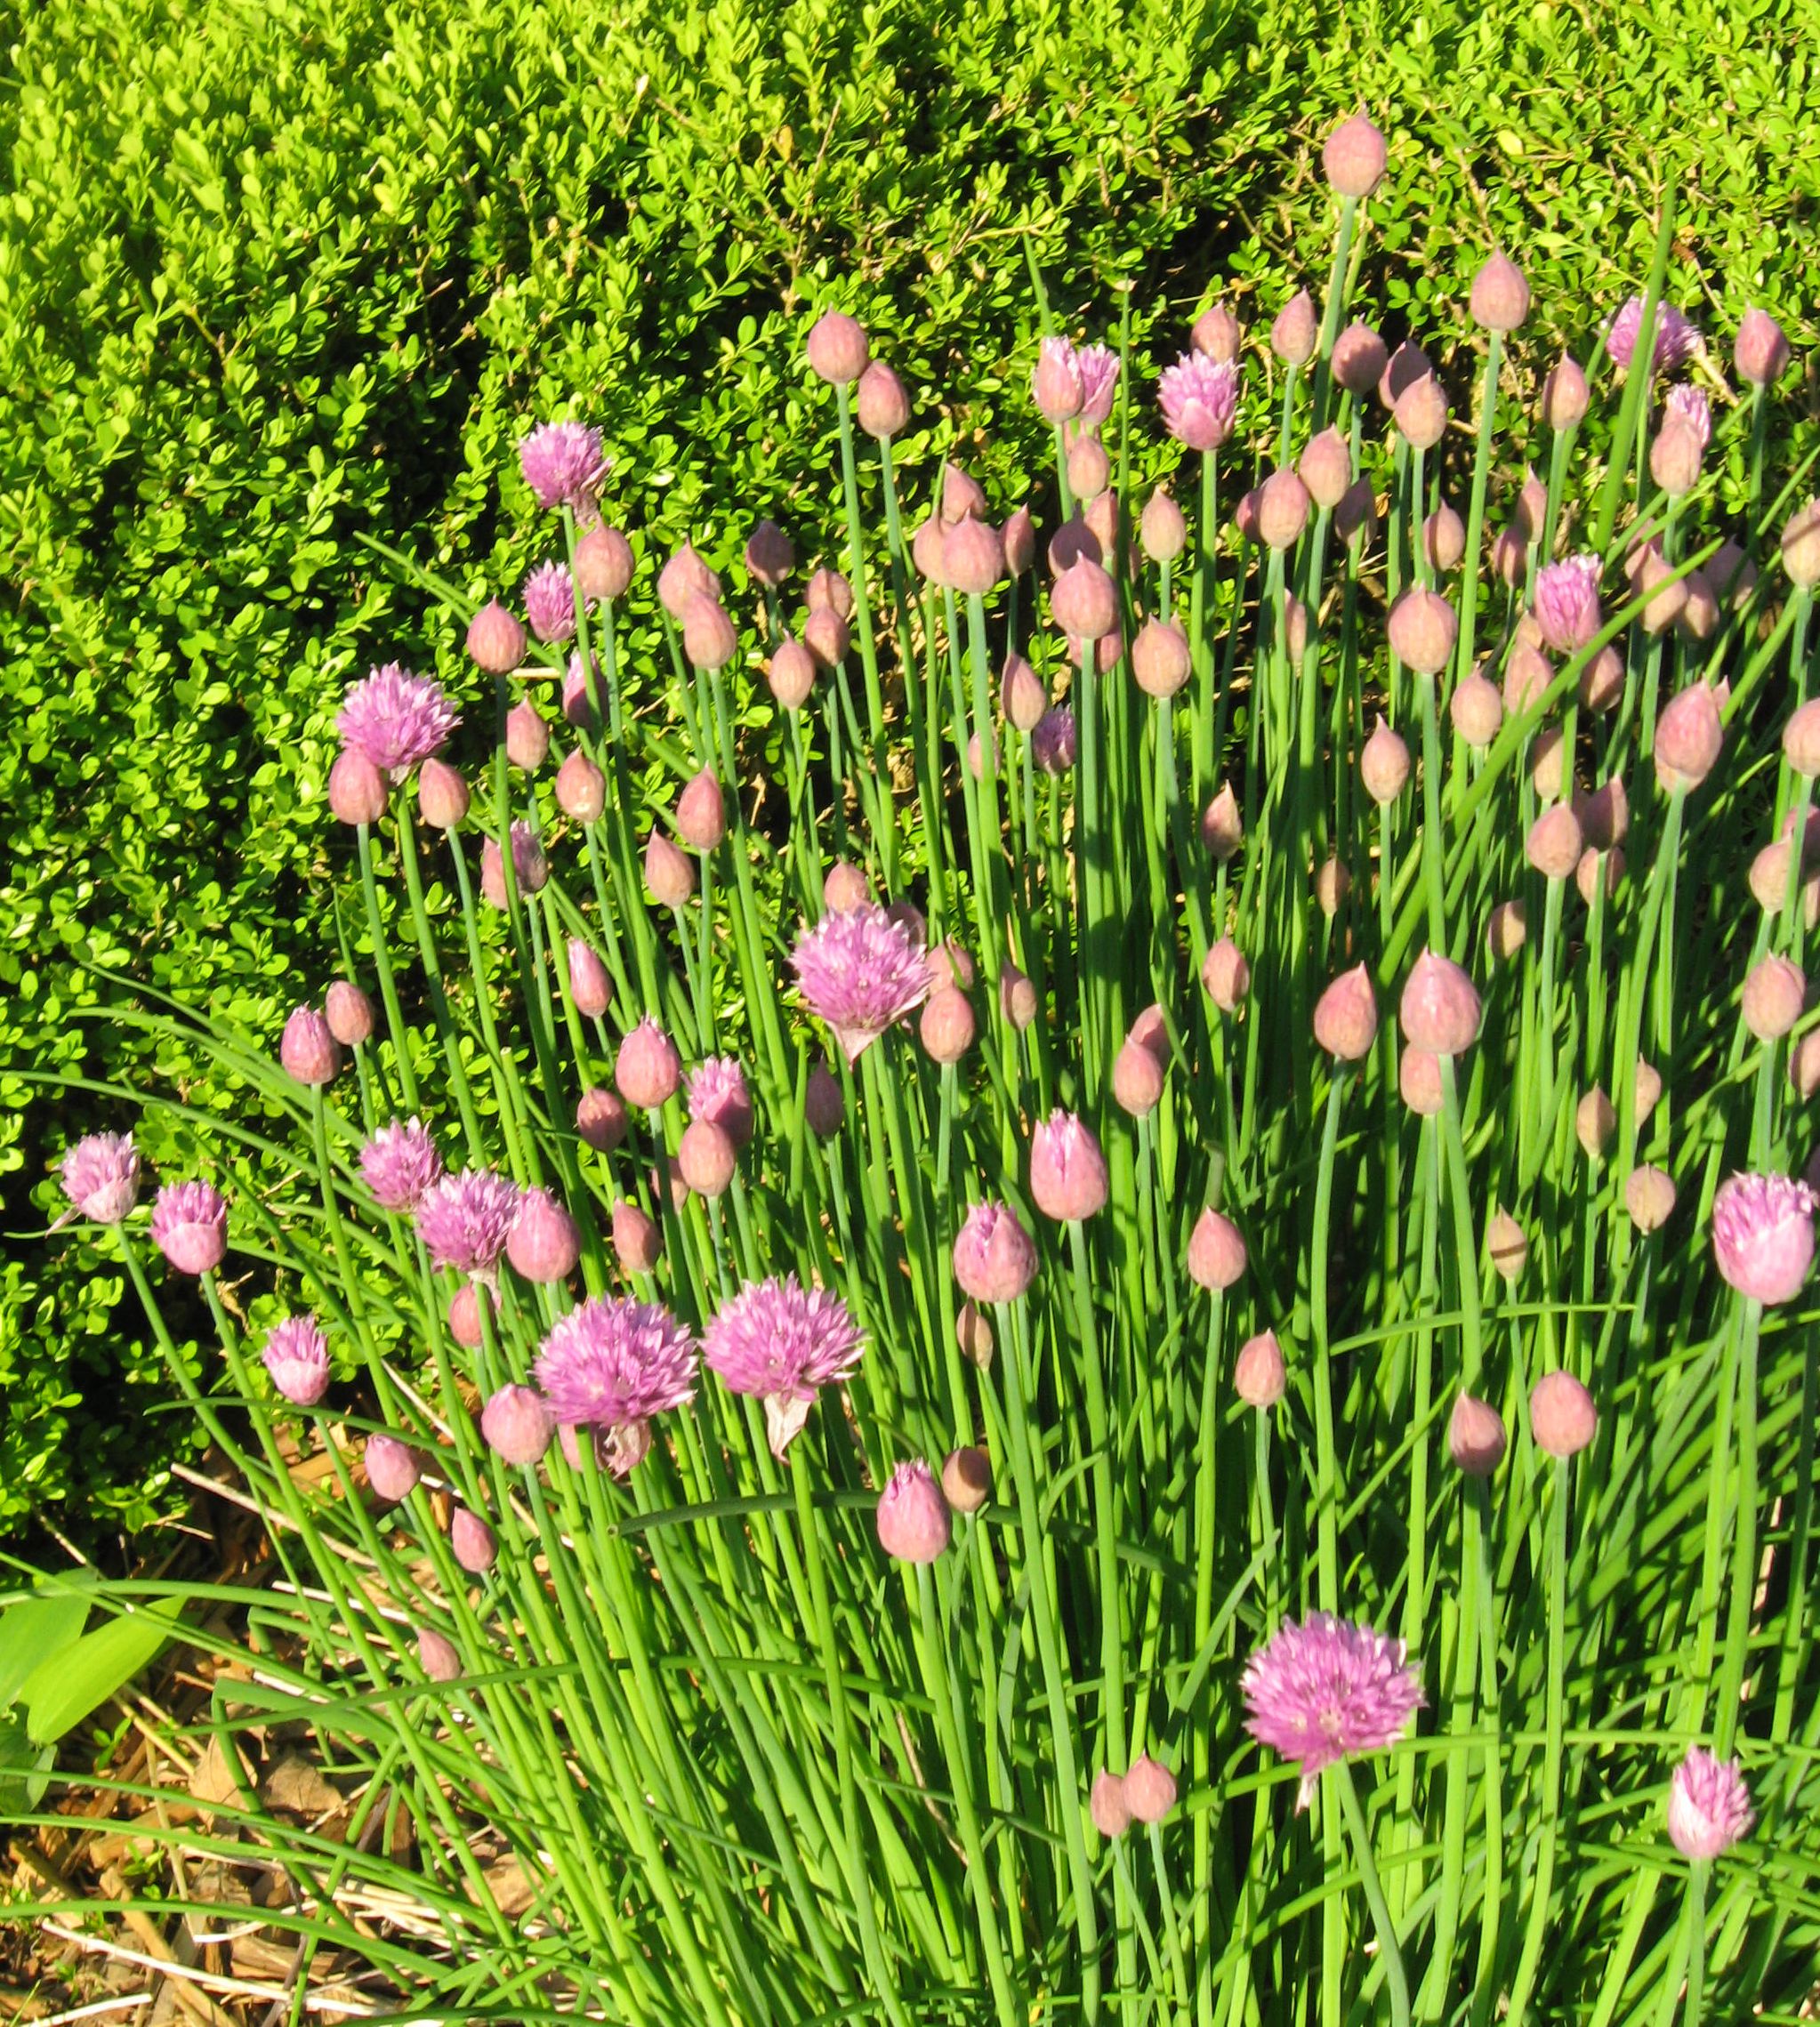 A patch of tall, thin, green stems with bright, pink flowers.